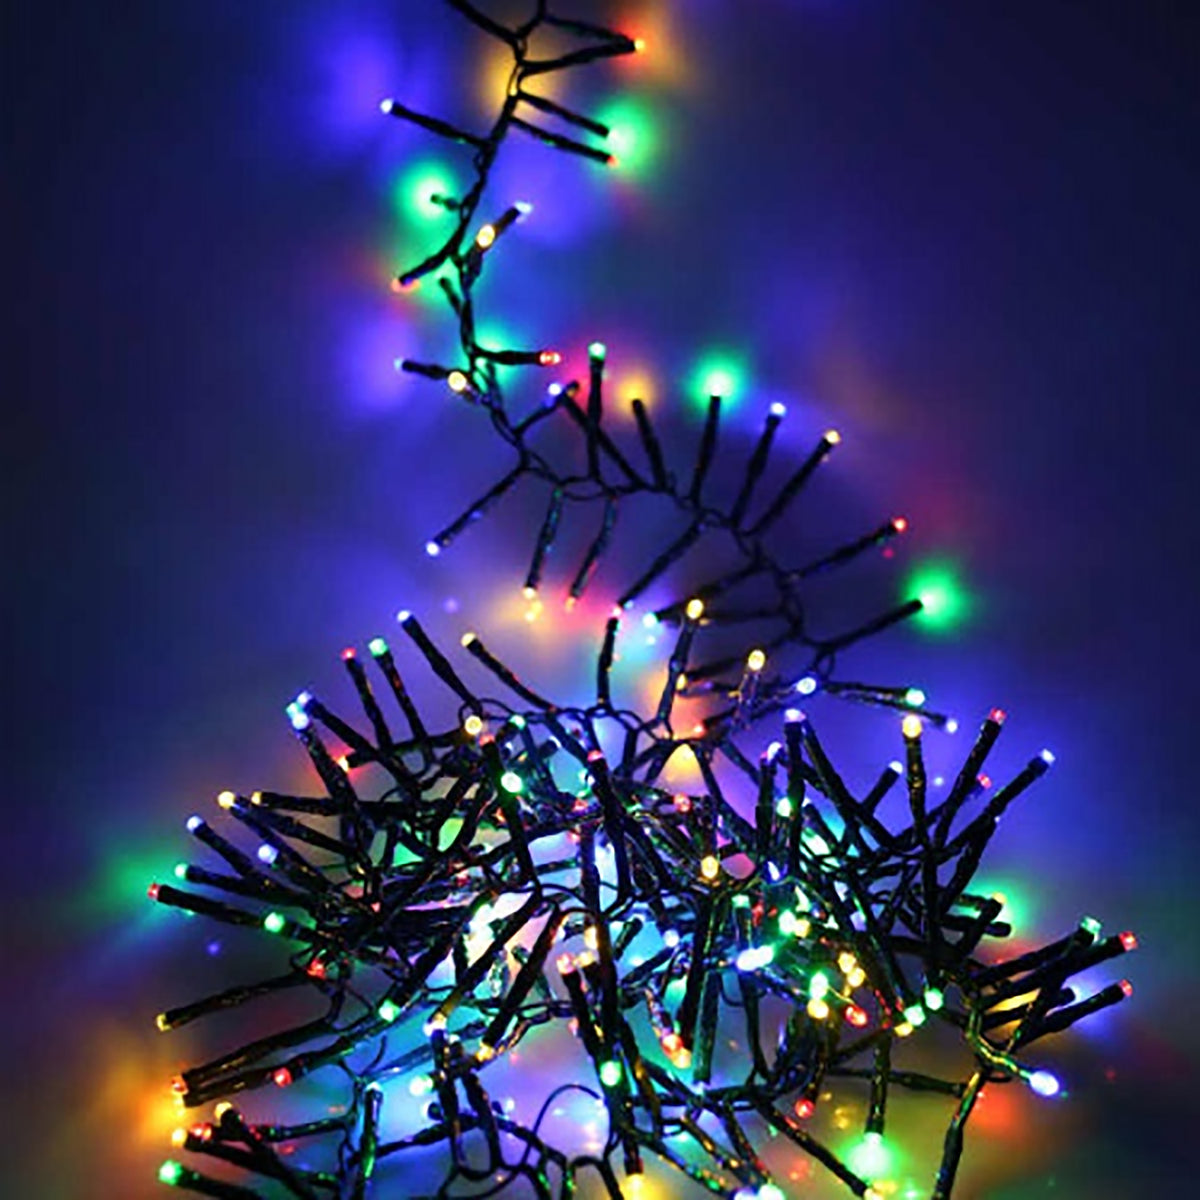 Noma Christmas 360, 480, 720, 960, 2000 Multifunction Cluster Lights with Green Cable - Multi Colour